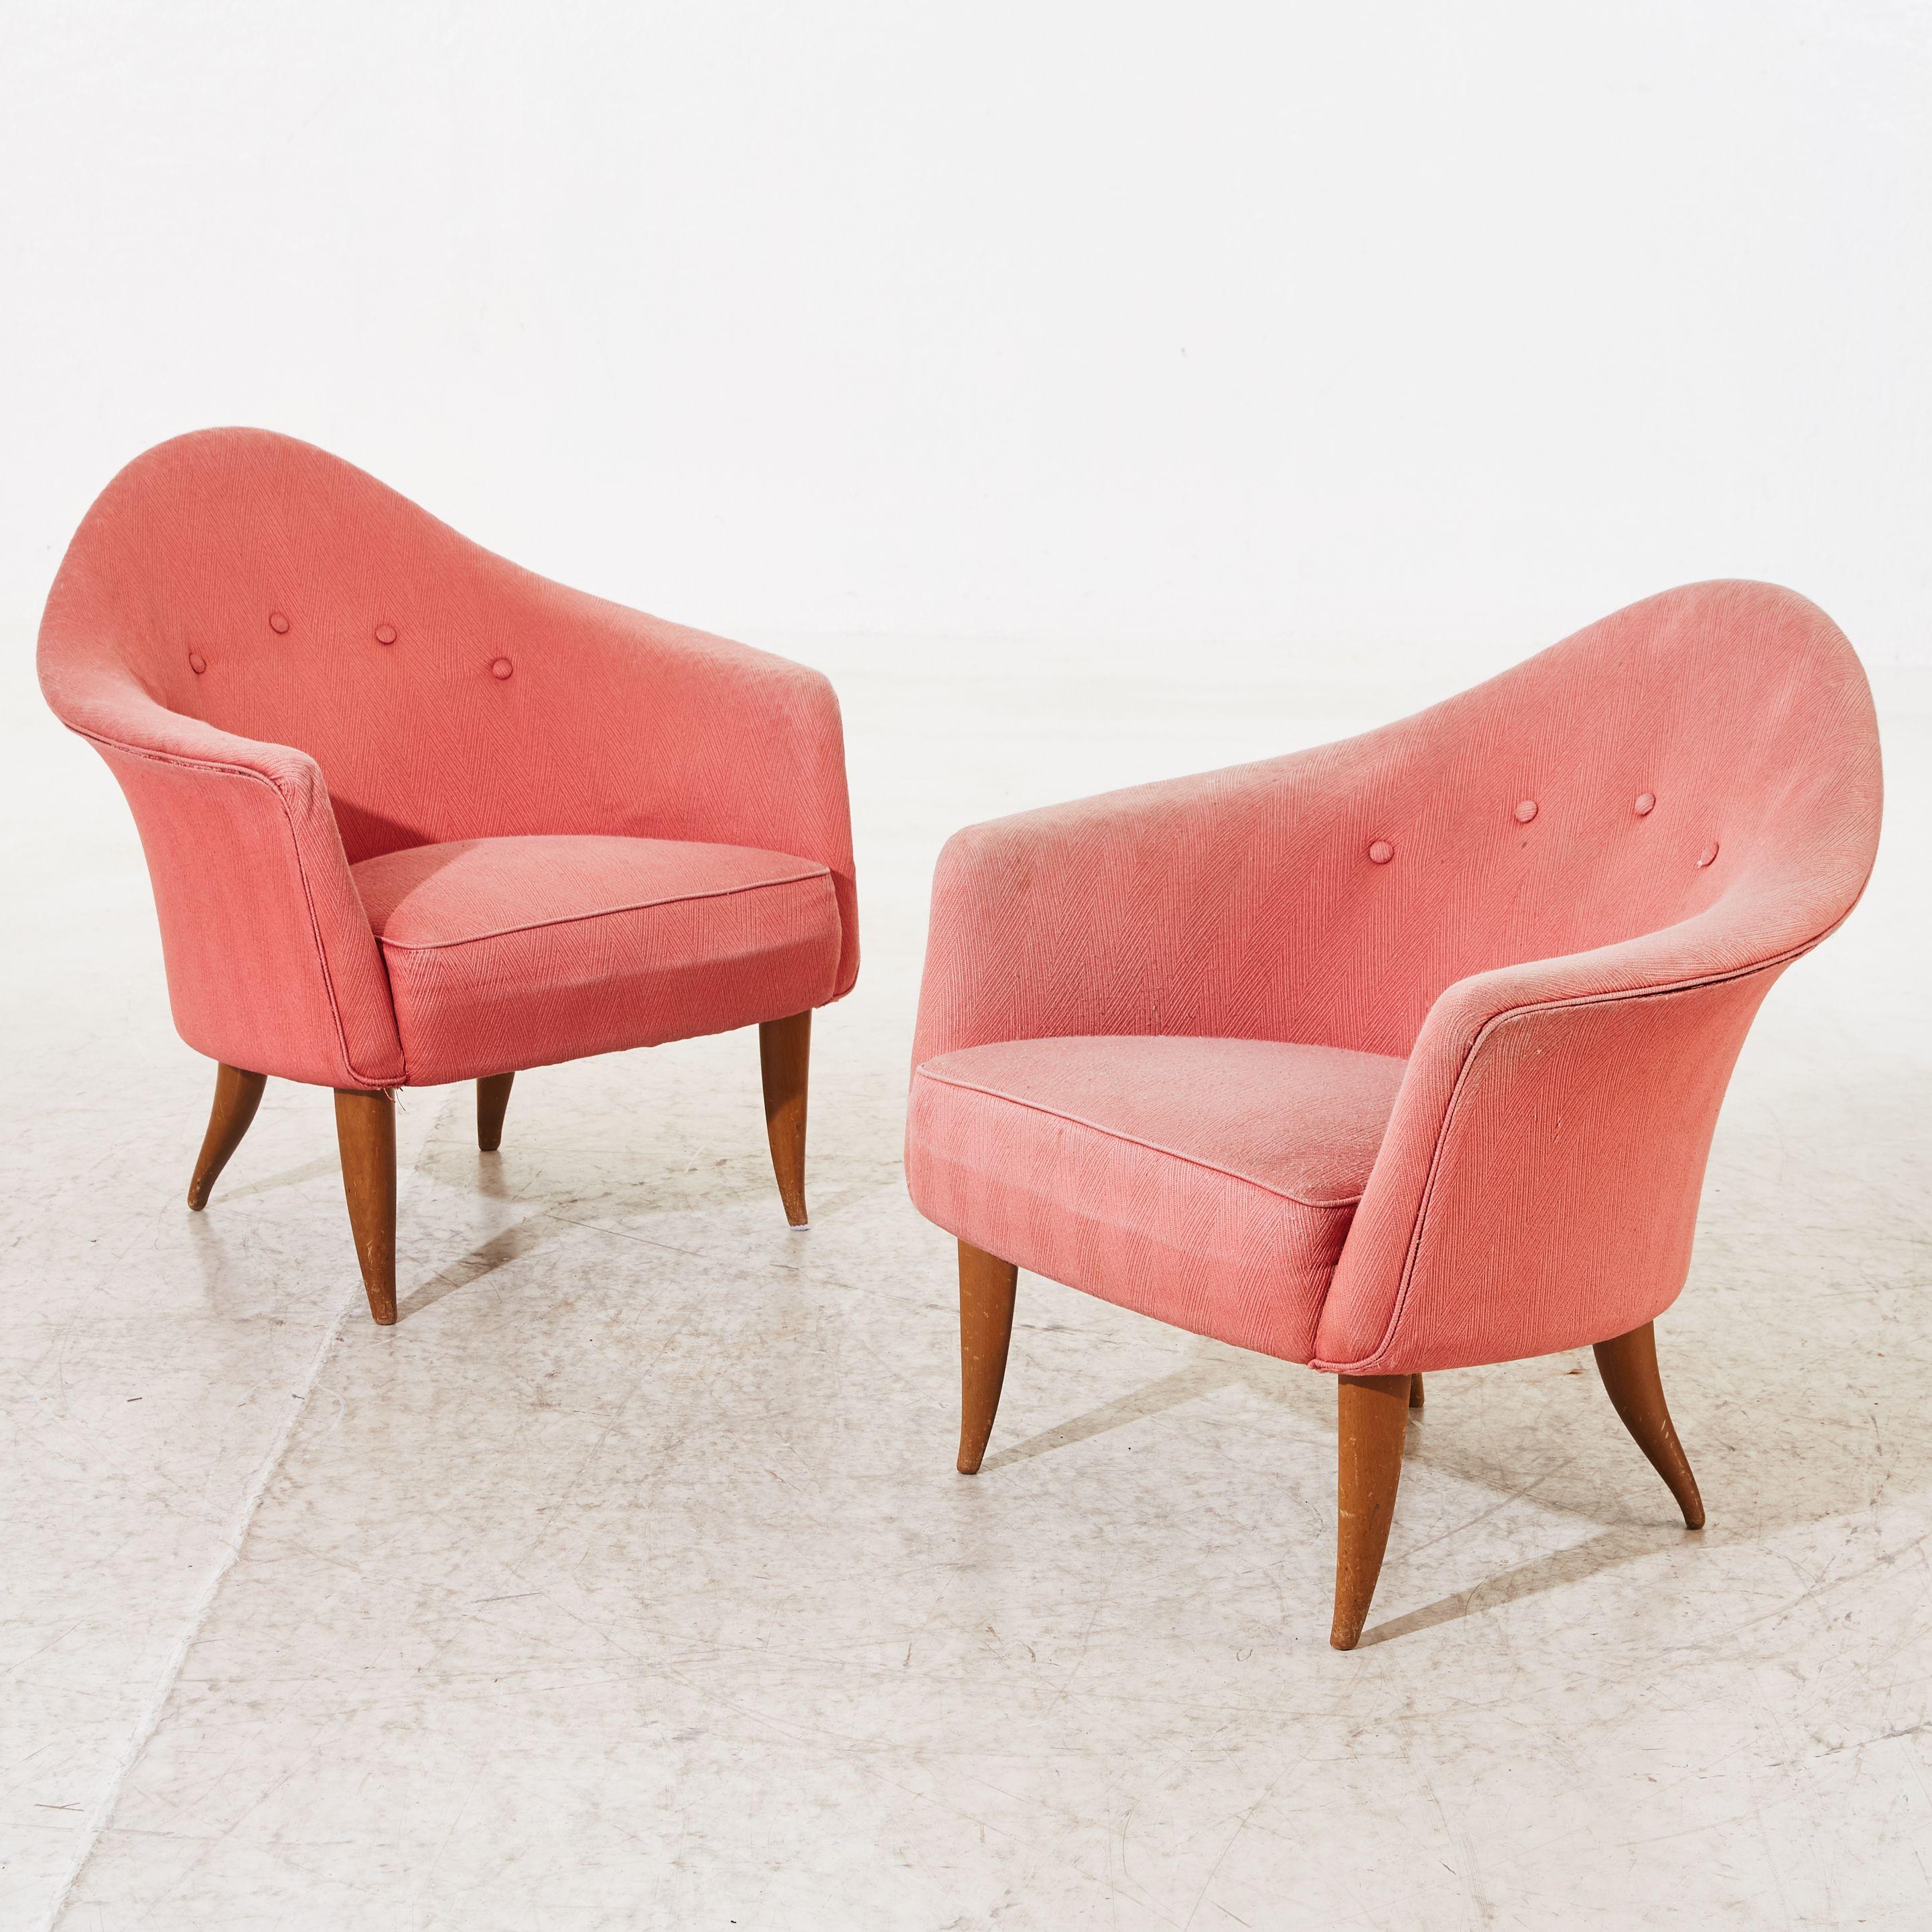 Fantastic pair of lounge chairs designed model Little Adam by leading Swedish midcentury-era designer, Kerstin Horlin Holmquist. The chairs were part of a design-series named 